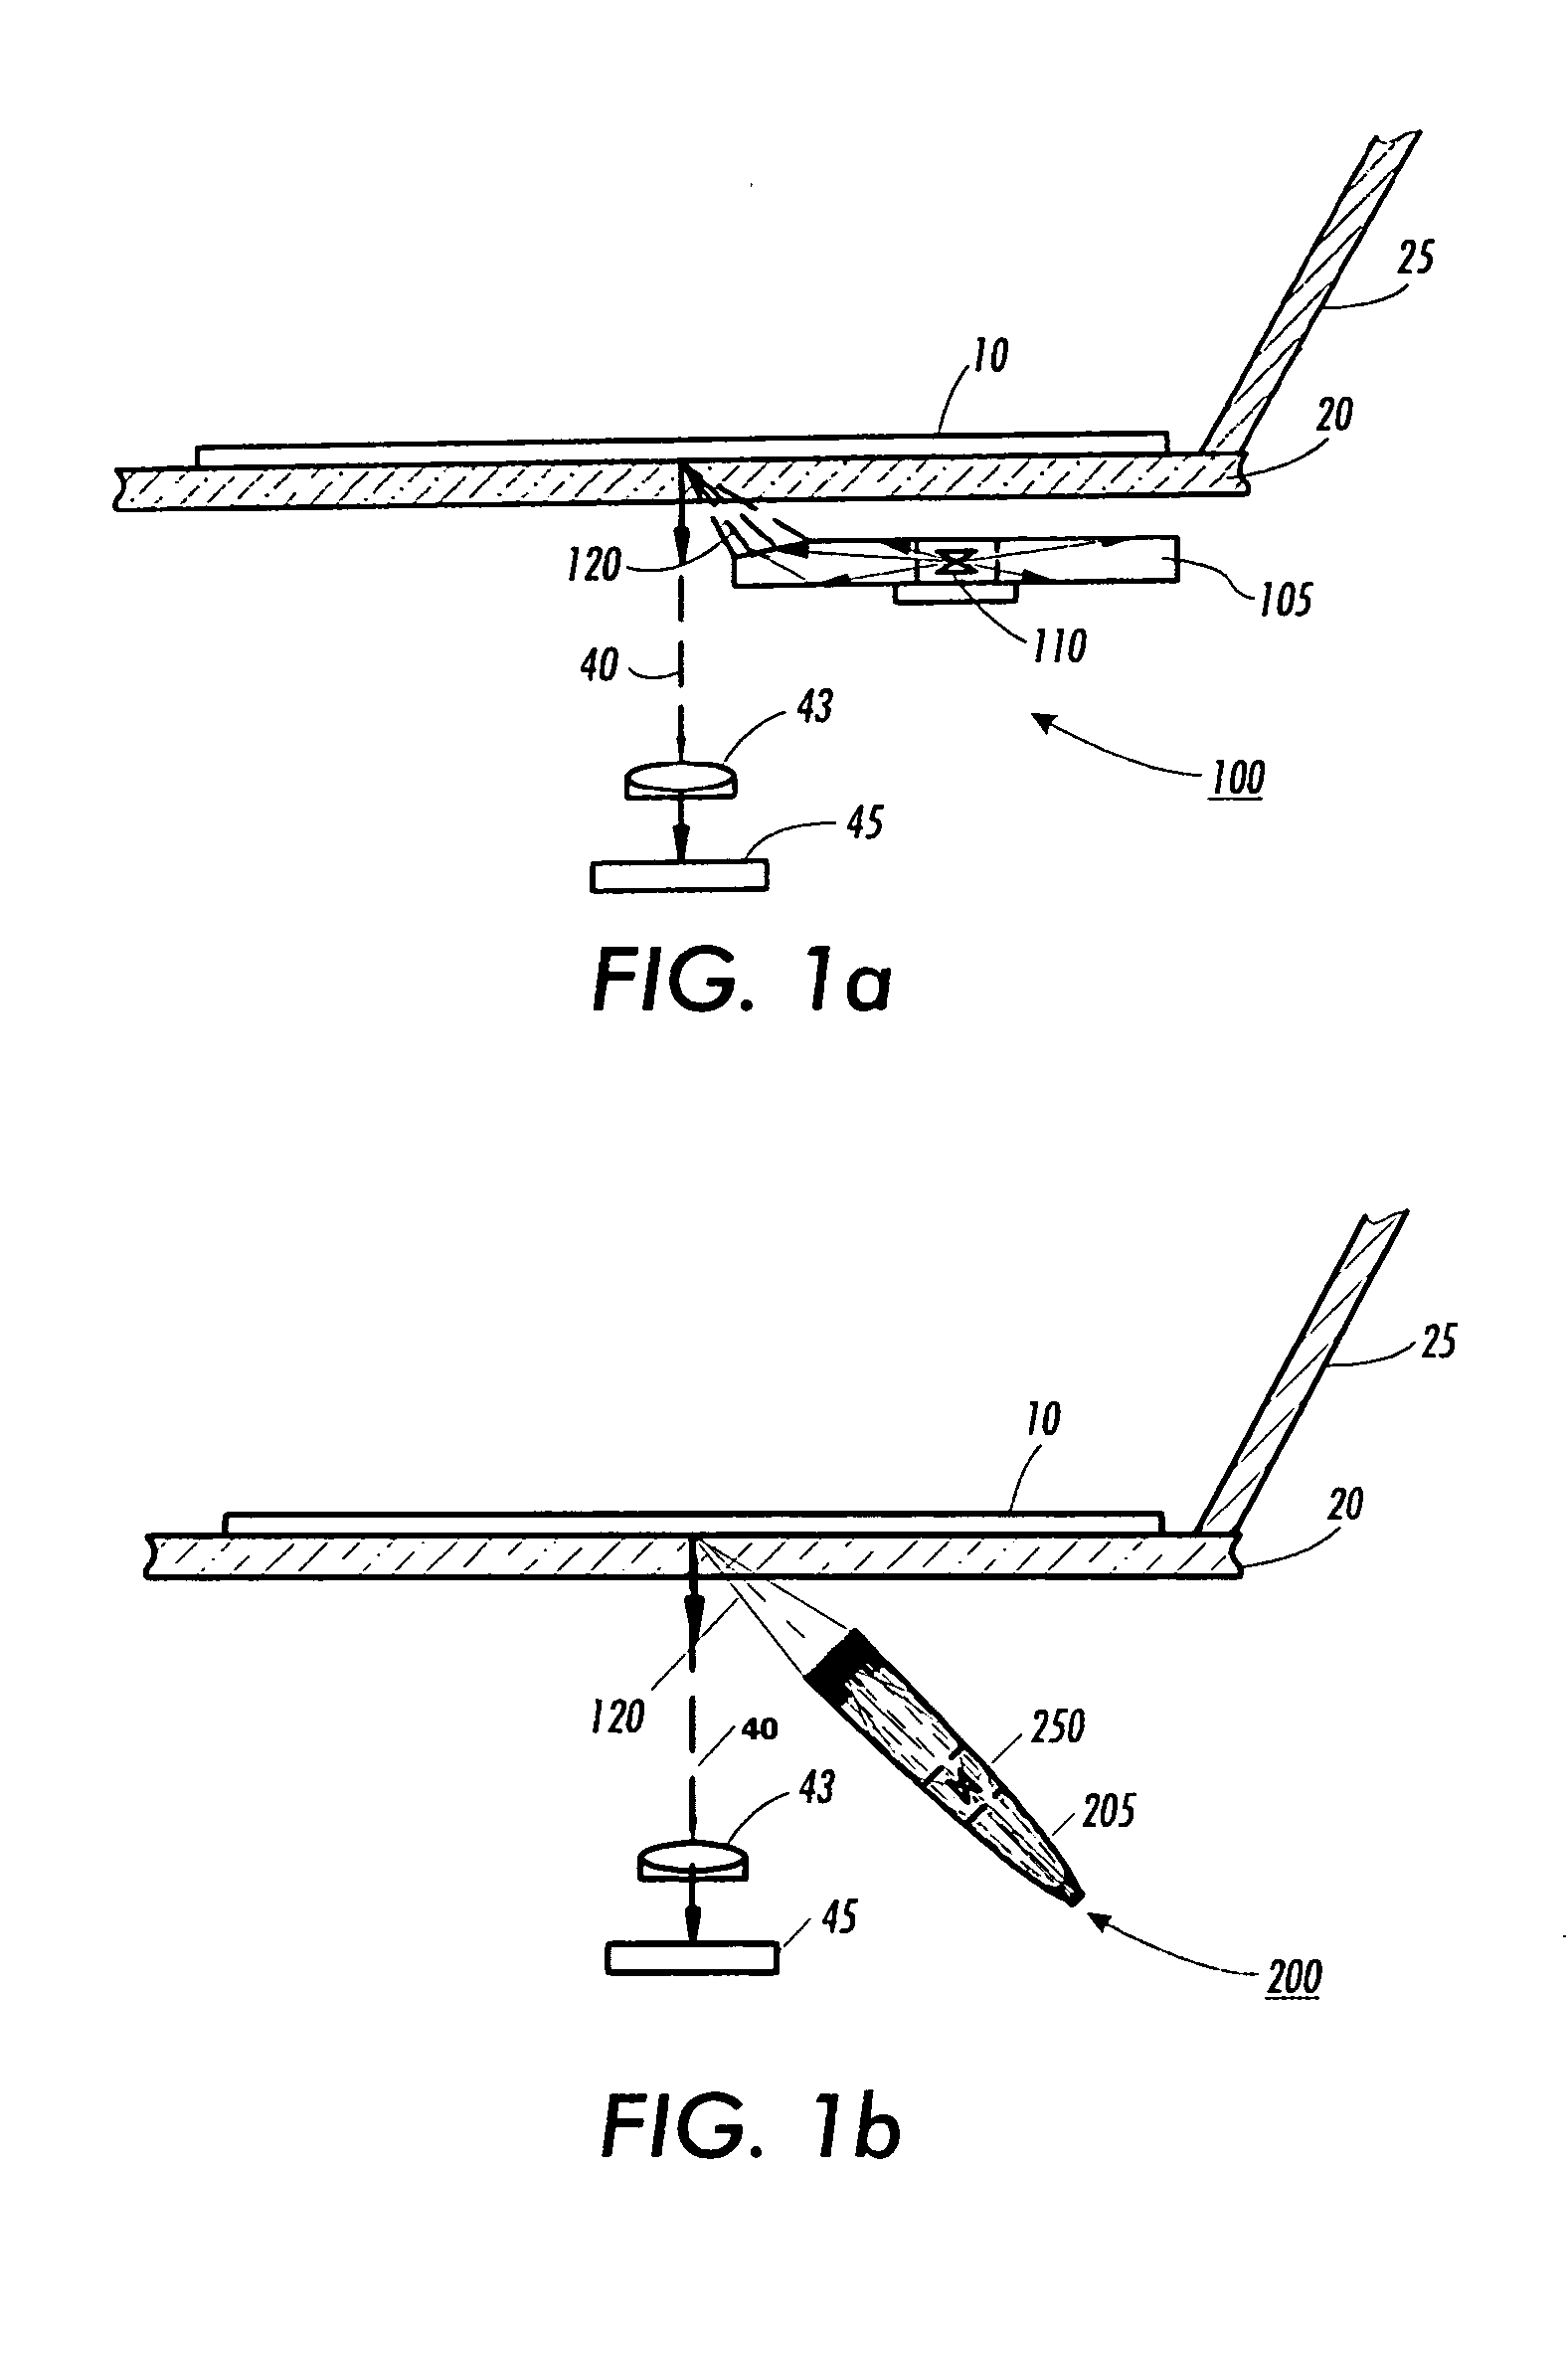 Compound curved concentrator based illuminator